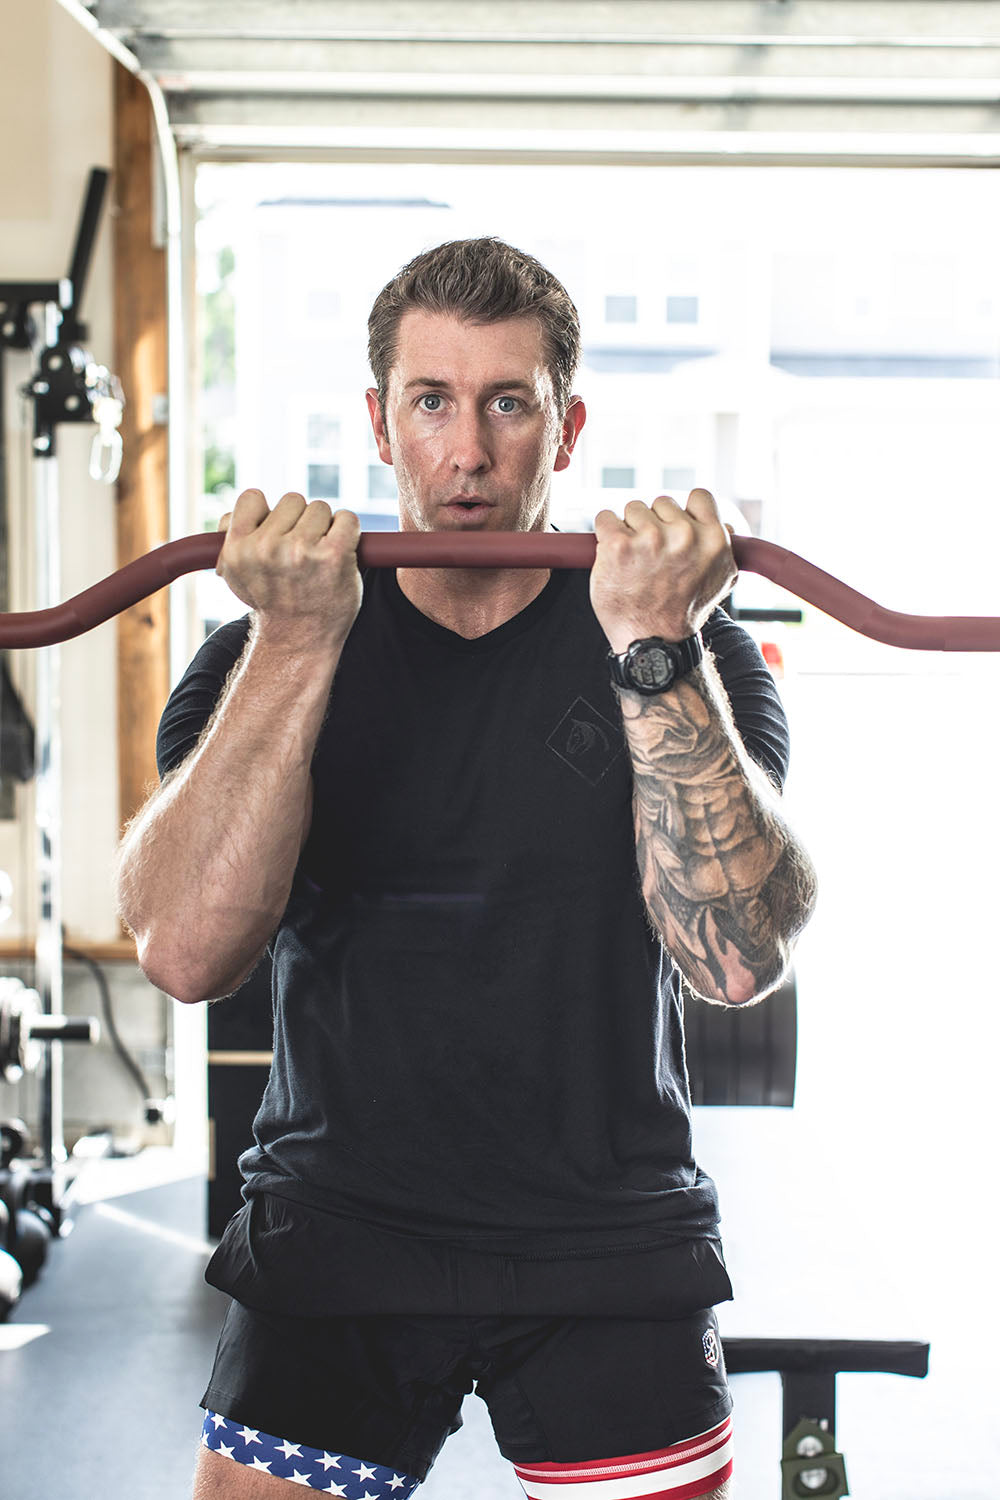 The Edge Bar is a mix between a shortened cambered bar and an EZ Bar. Perfect for enhanced bicep workouts, chest workouts, and more. This image presents the Edge Rackable Cambered Bar being used by a man for a bicep workout.